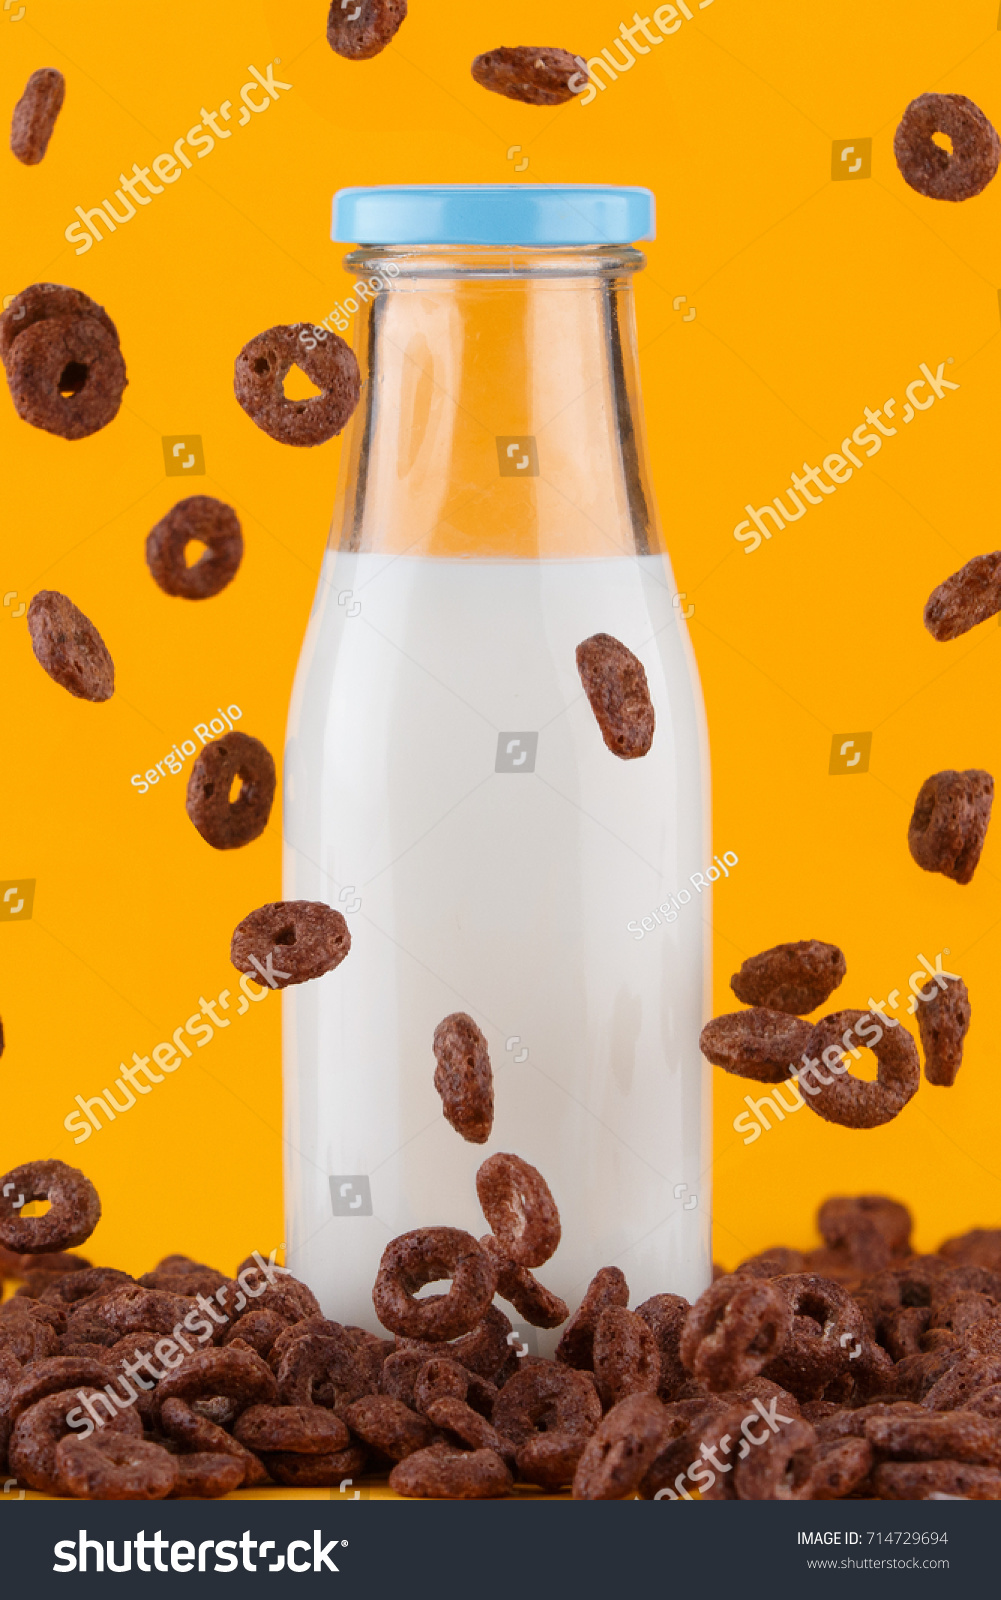 Download Chocolate Cereal Yellow Milk Bottle On Stock Photo Edit Now 714729694 PSD Mockup Templates